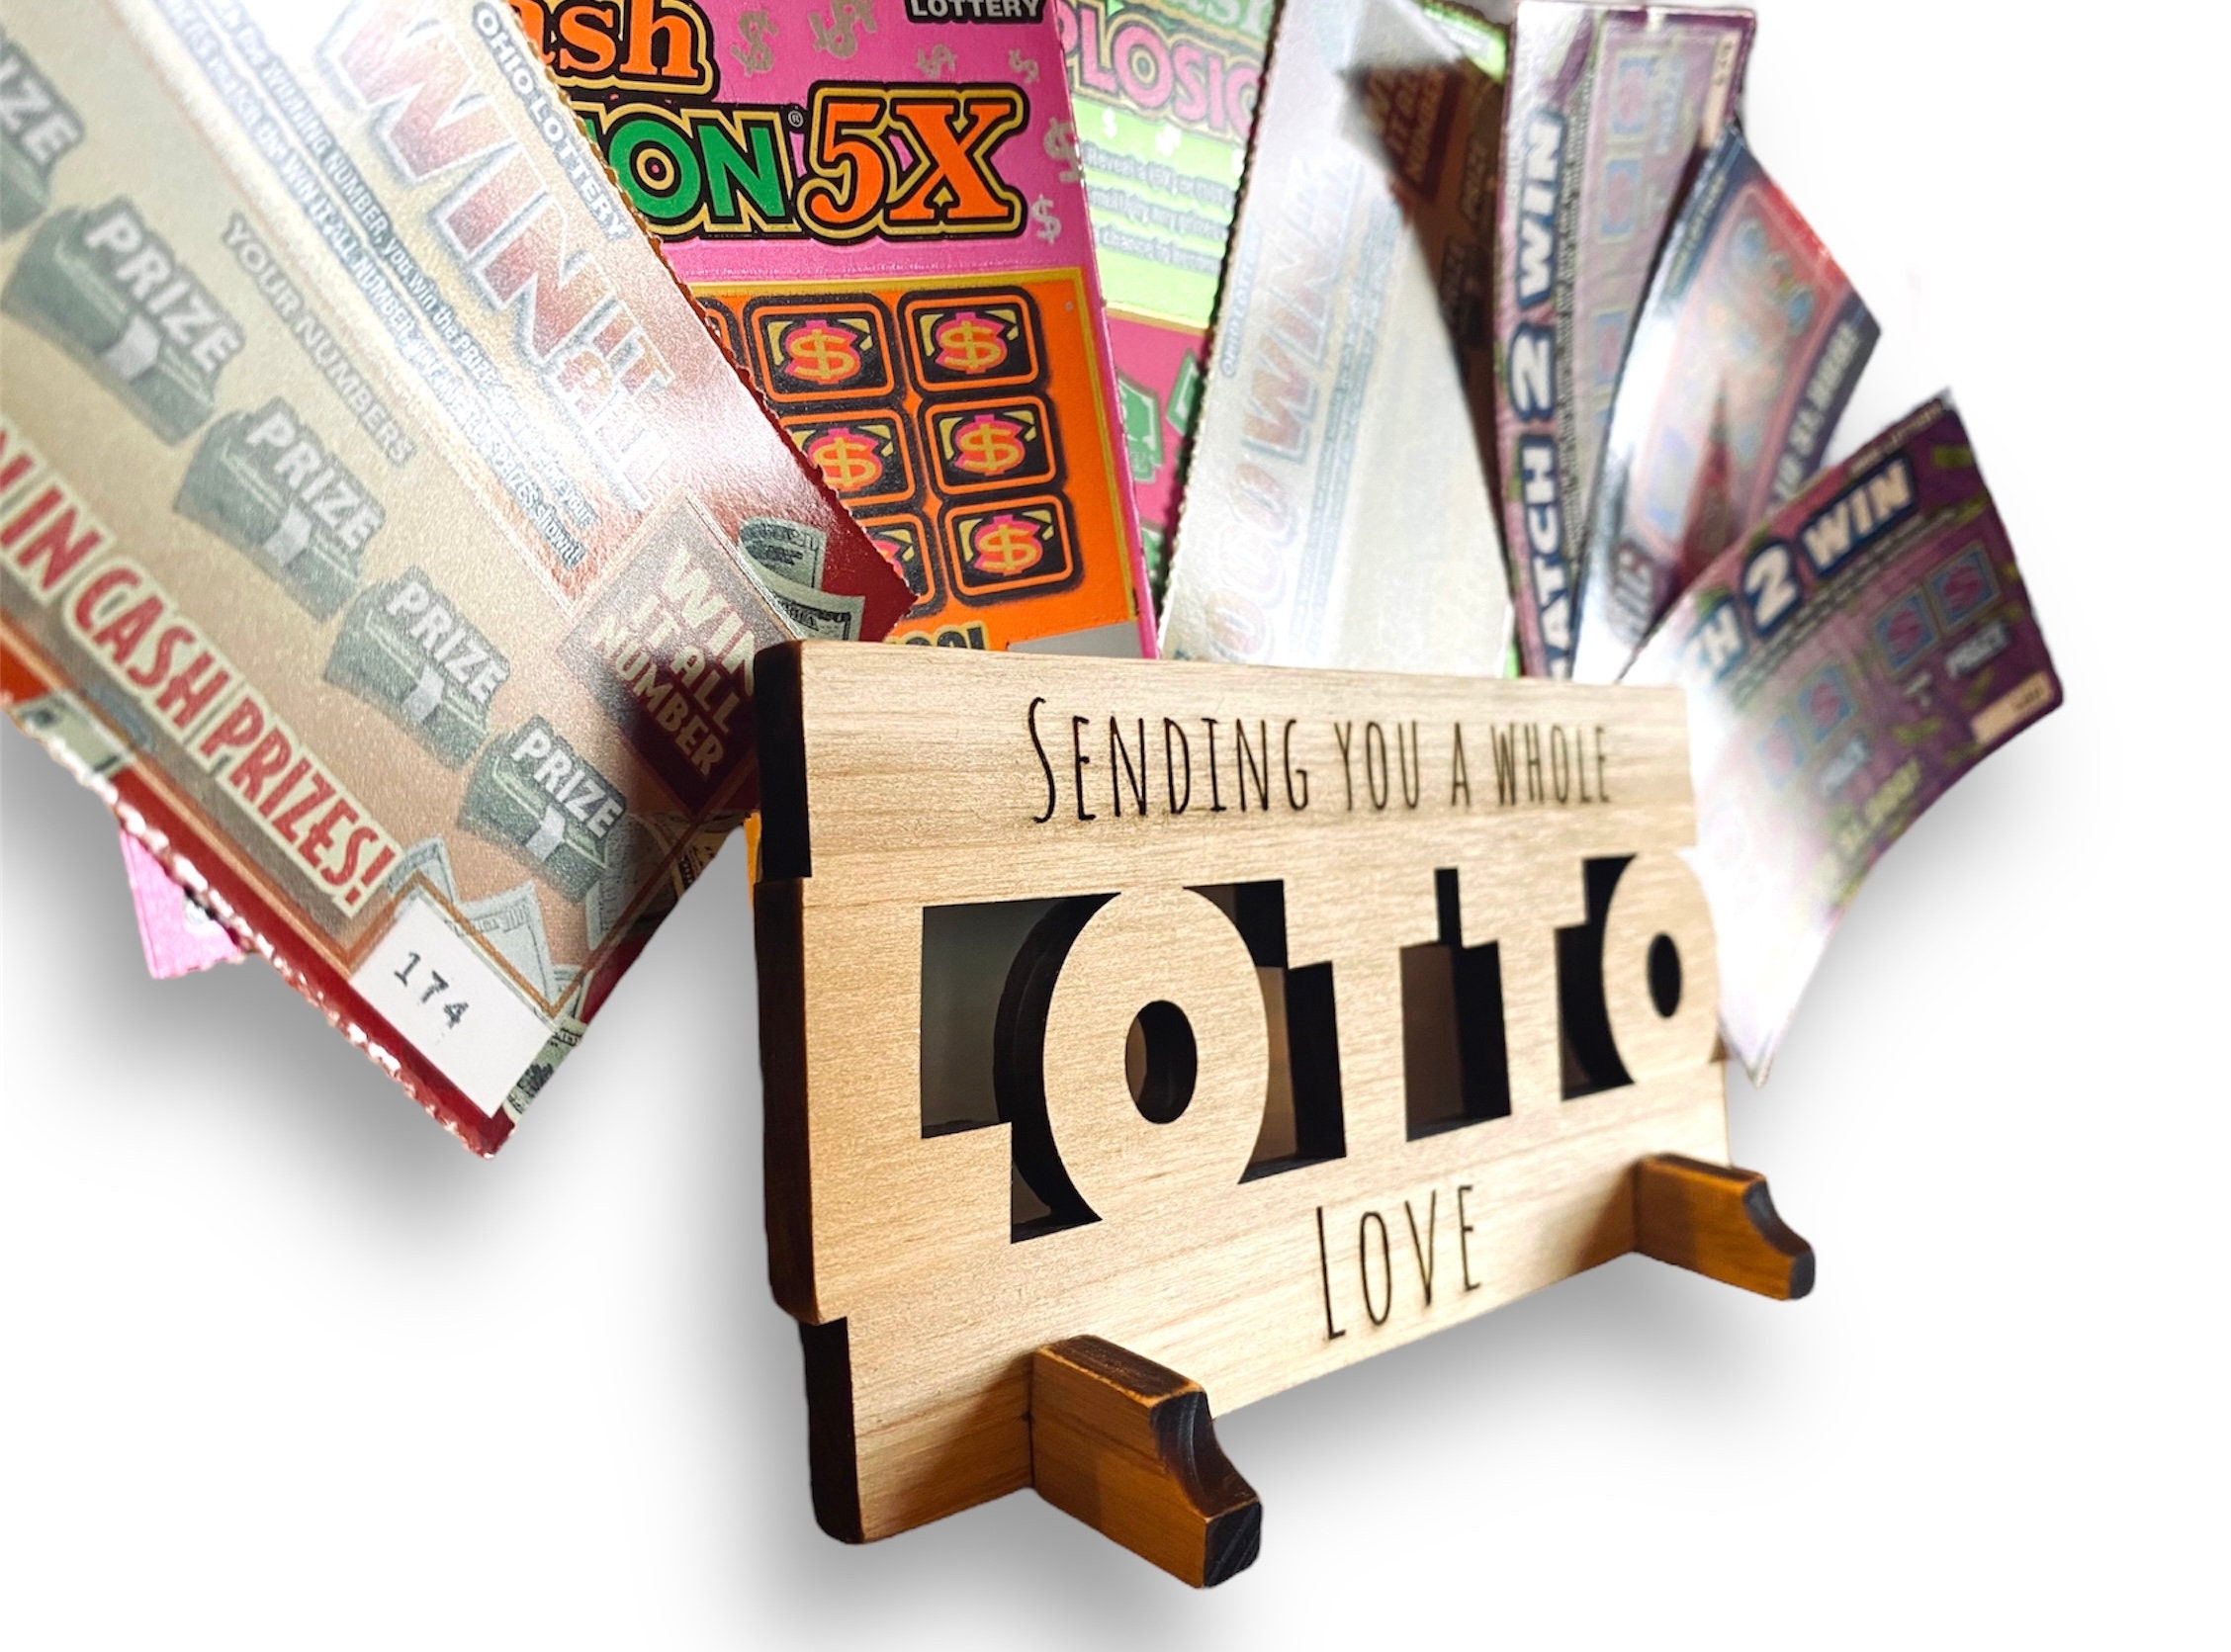 Lottery Ticket Holder, Solid Wood Scratch off Lottery Ticket Holder  Birthday Gift, Happy Birthday Lottery, Whole Lotto Love 